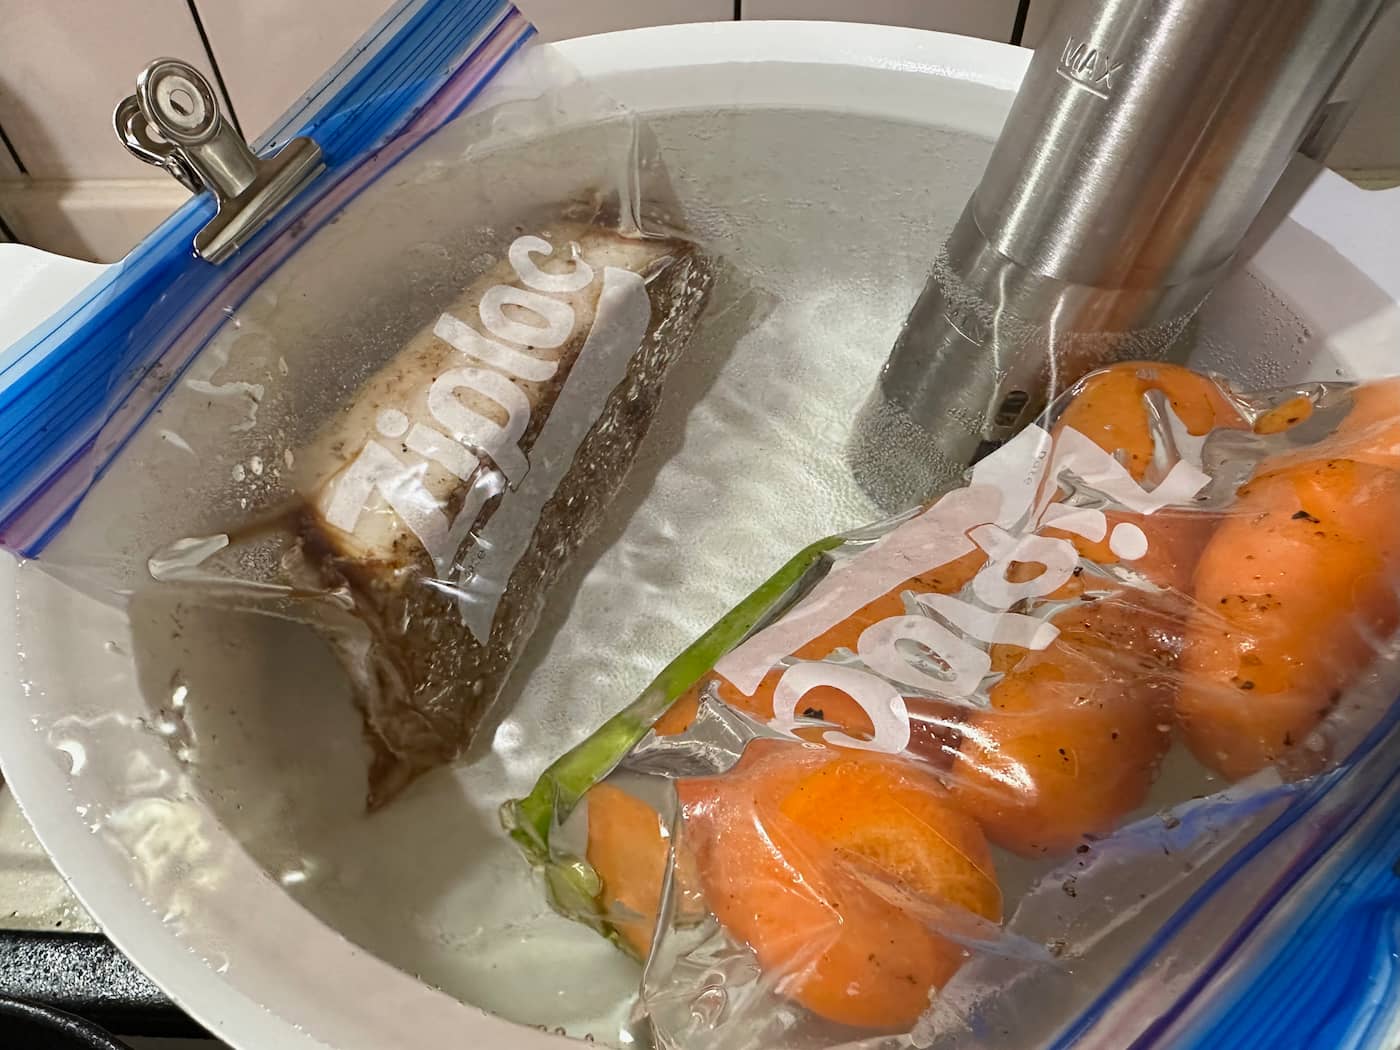 A pot with a sous vide stick heating up water. Steak and carrots in zip-lock plastic bags are immersed for cooking.